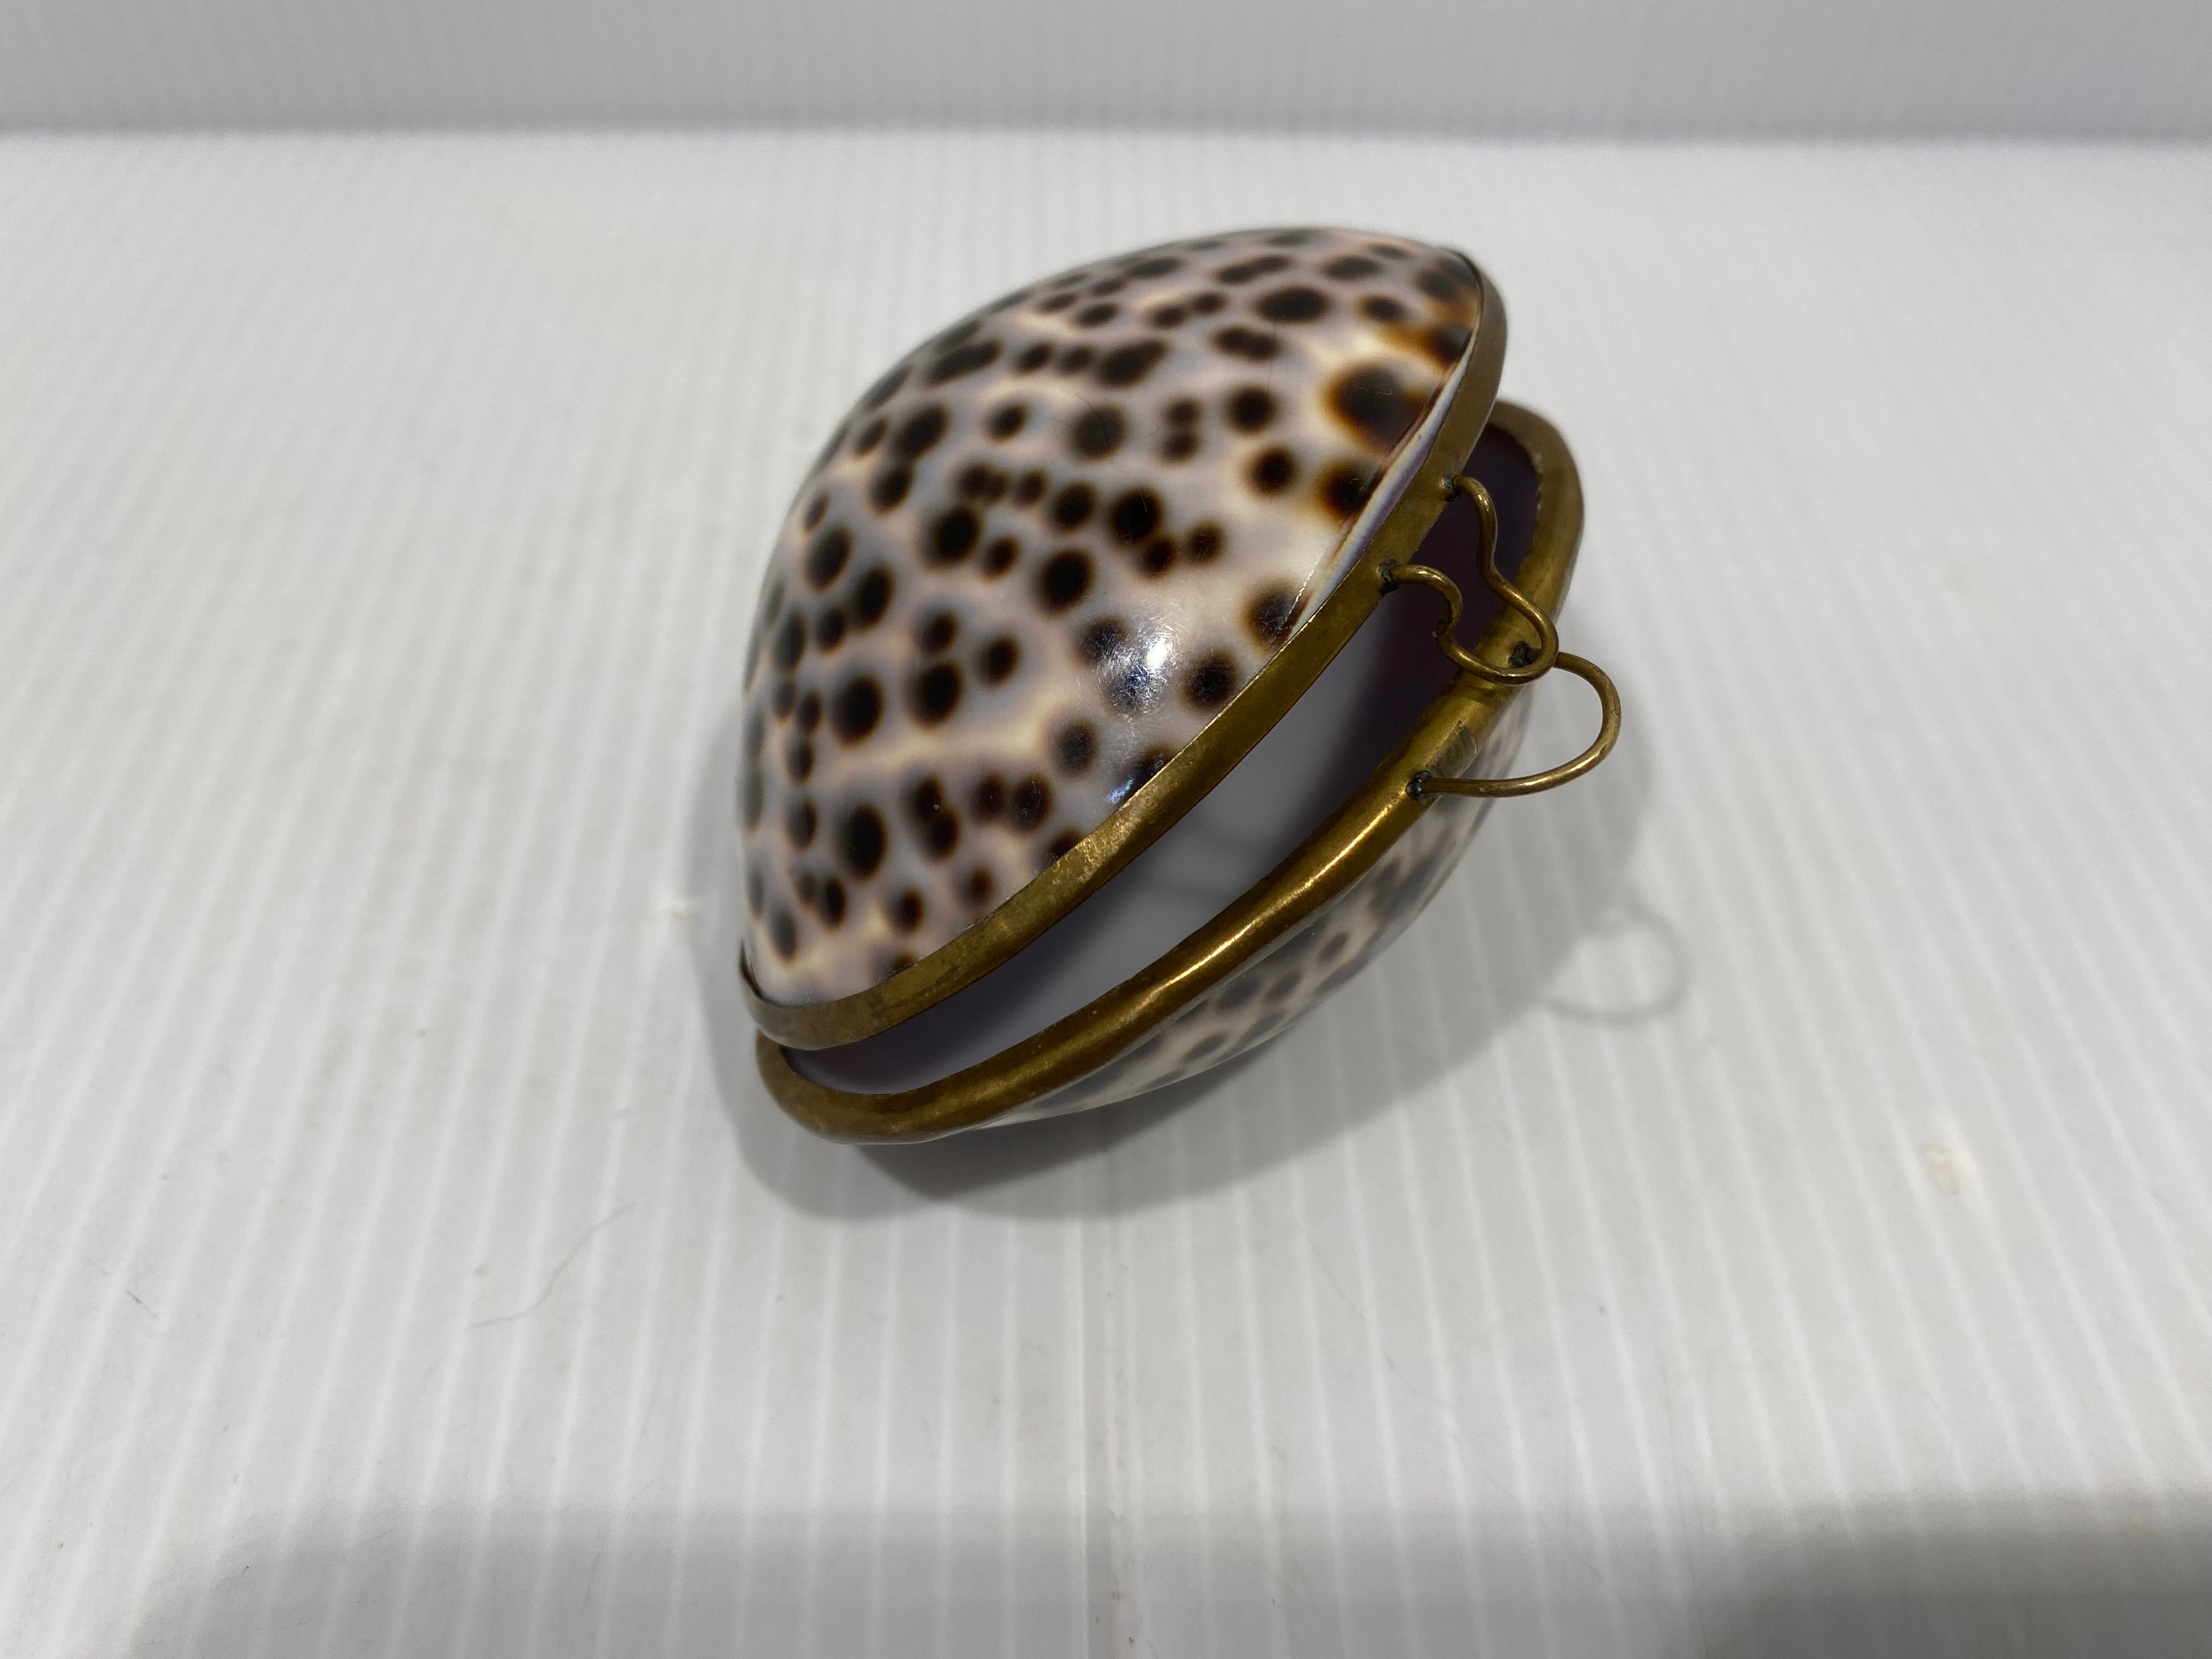 Lovely little Vintage Cowrie shell box.